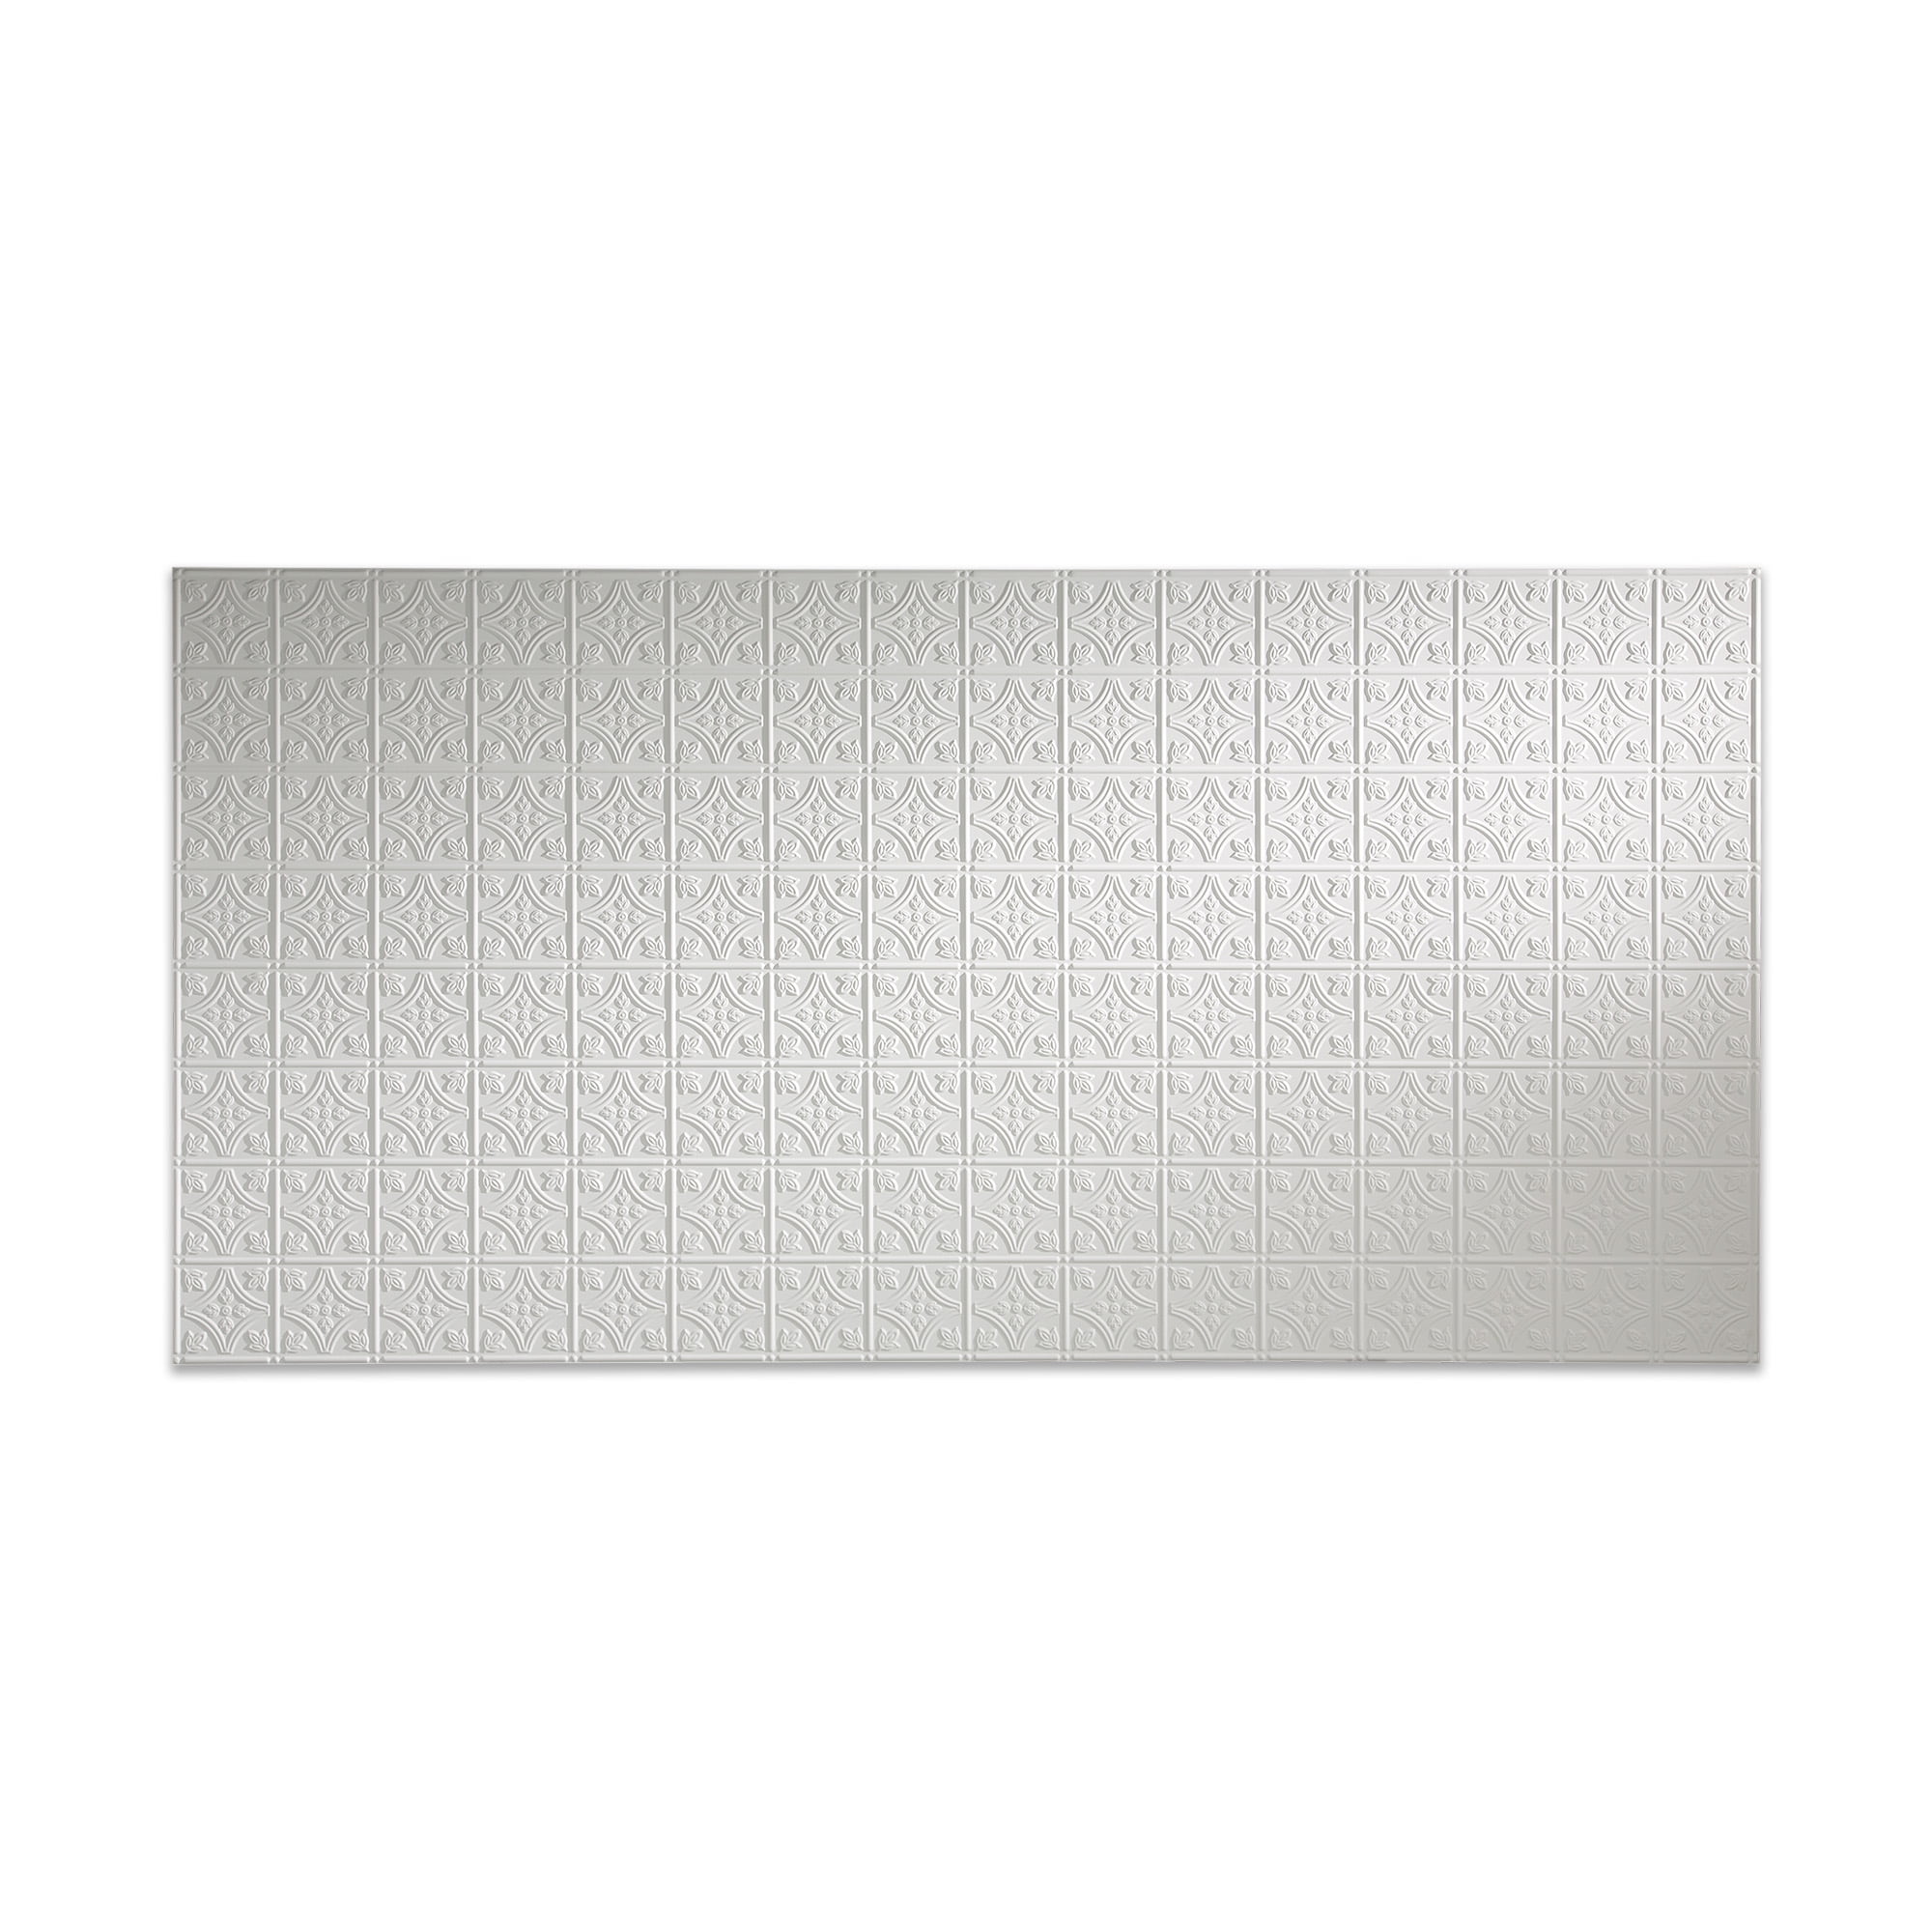 FASÄDE Traditional 1 4-foot x 8-foot PVC Wall Panel in Matte White ...